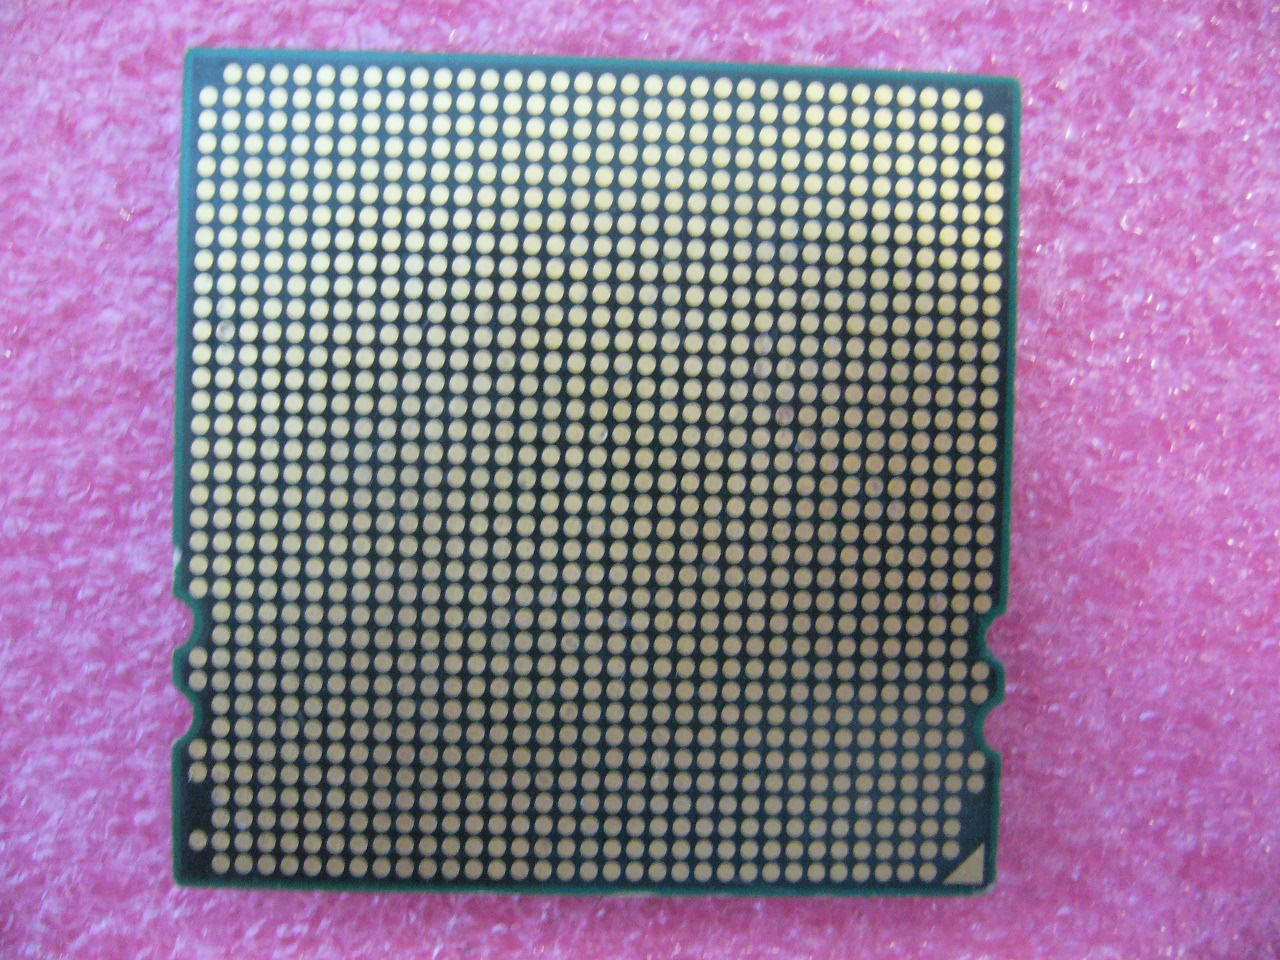 QTY 1x AMD Opteron 2435 2.6 GHz Six Core (OS2435WJS6DGN) CPU Socket F 1207 - Click Image to Close